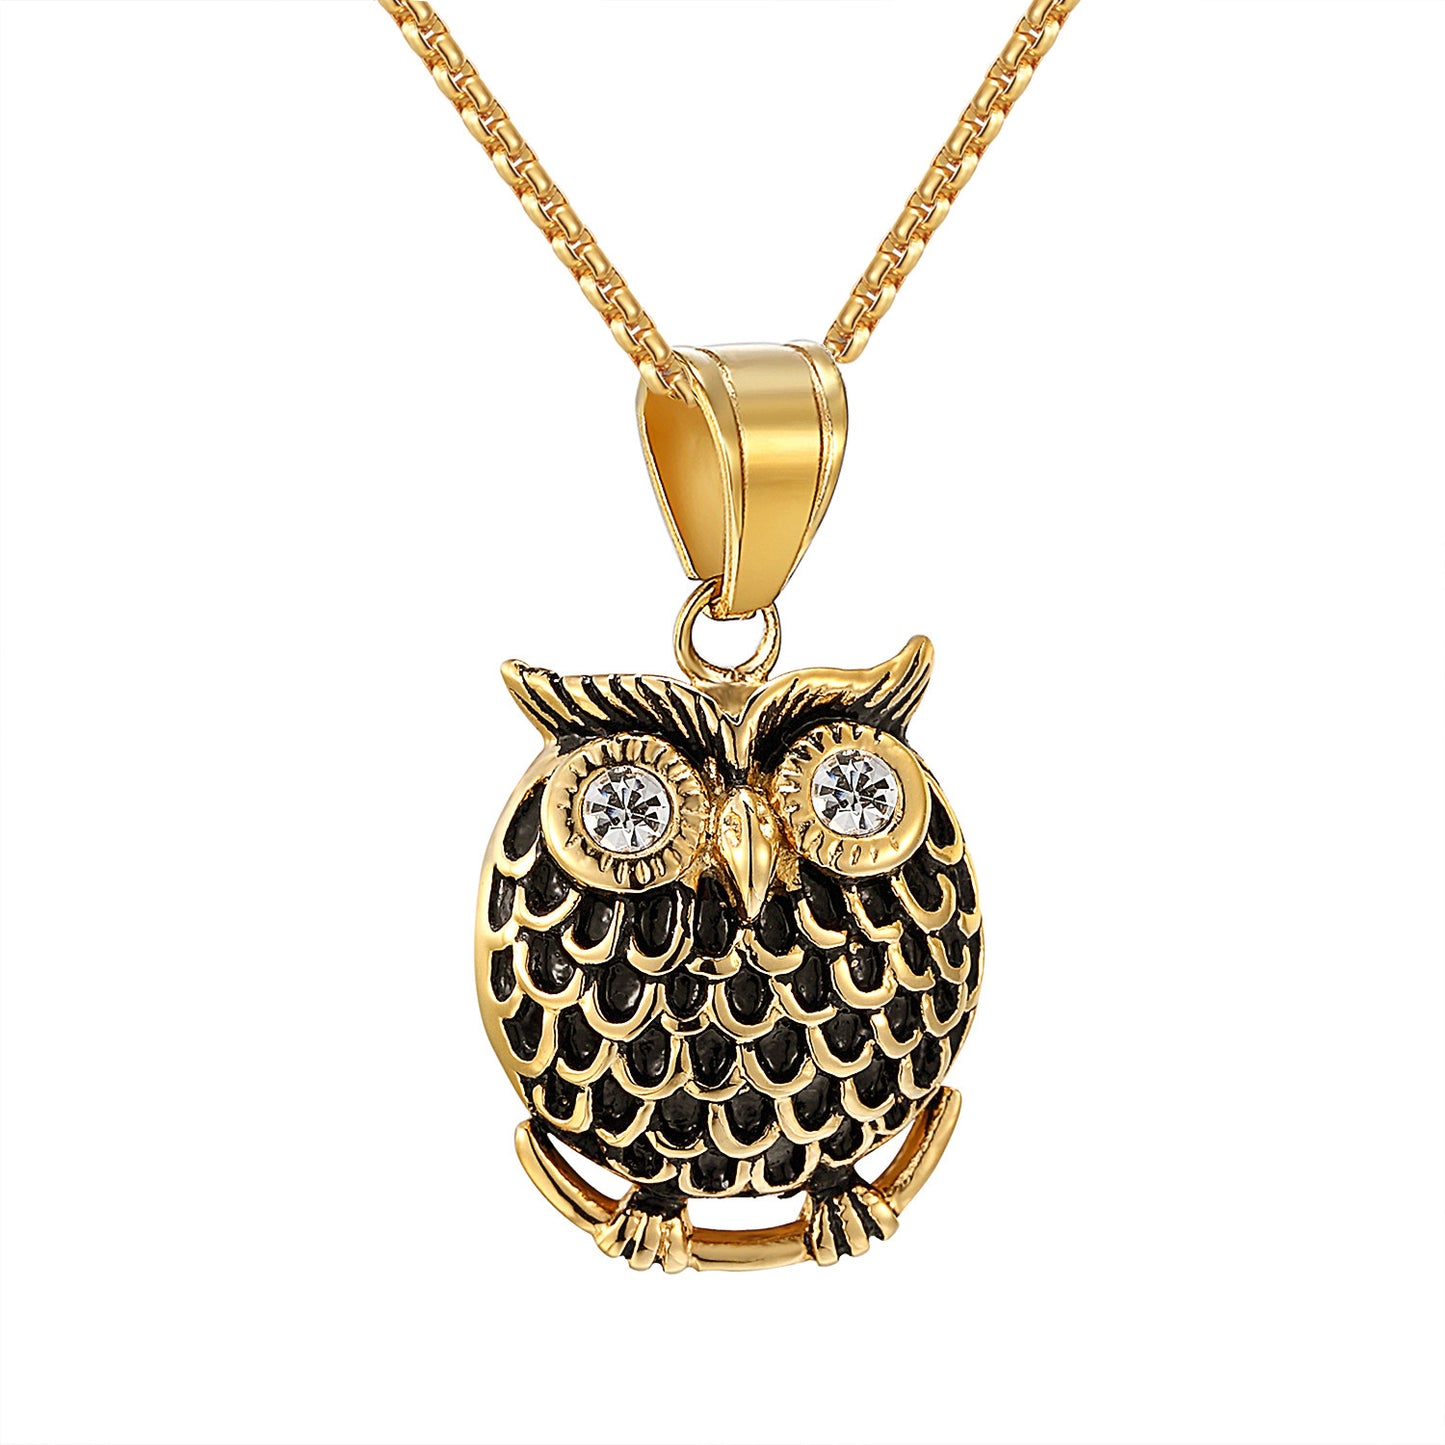 Stainless Steel Owl Pendant Simulated Diamond 14k Gold Tone Box Necklace 24"